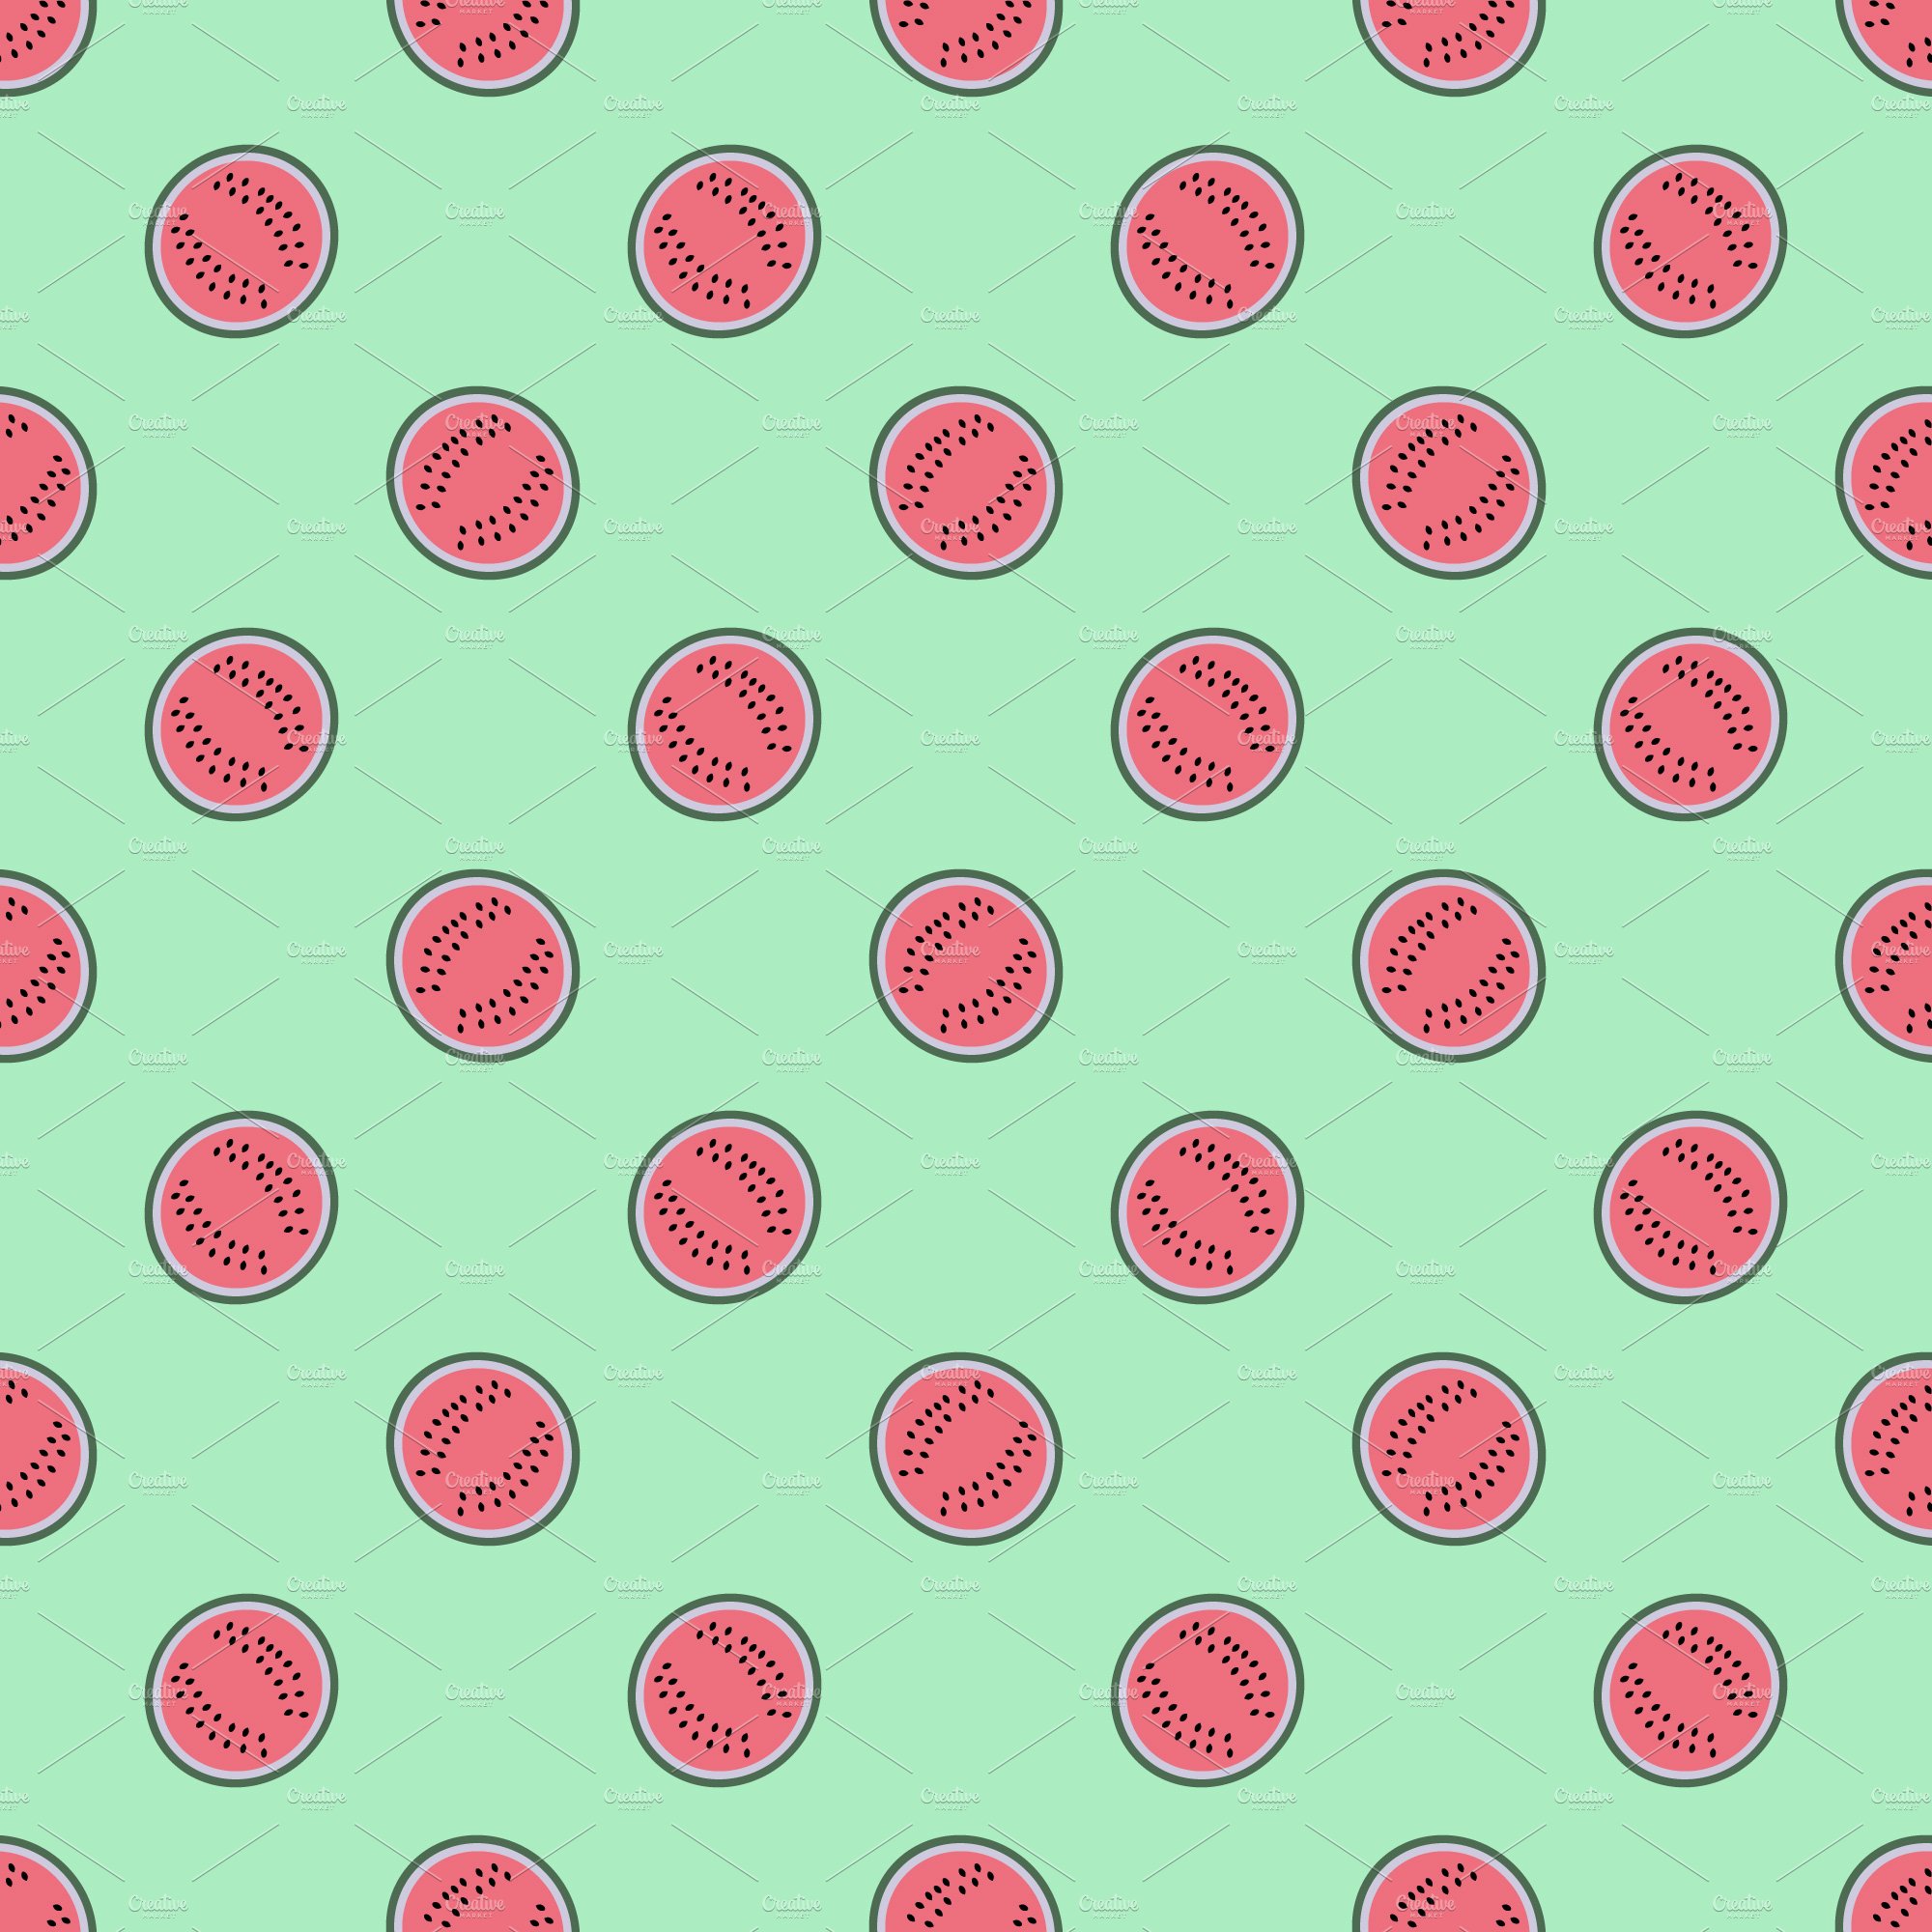 Seamless watermelon cover image.